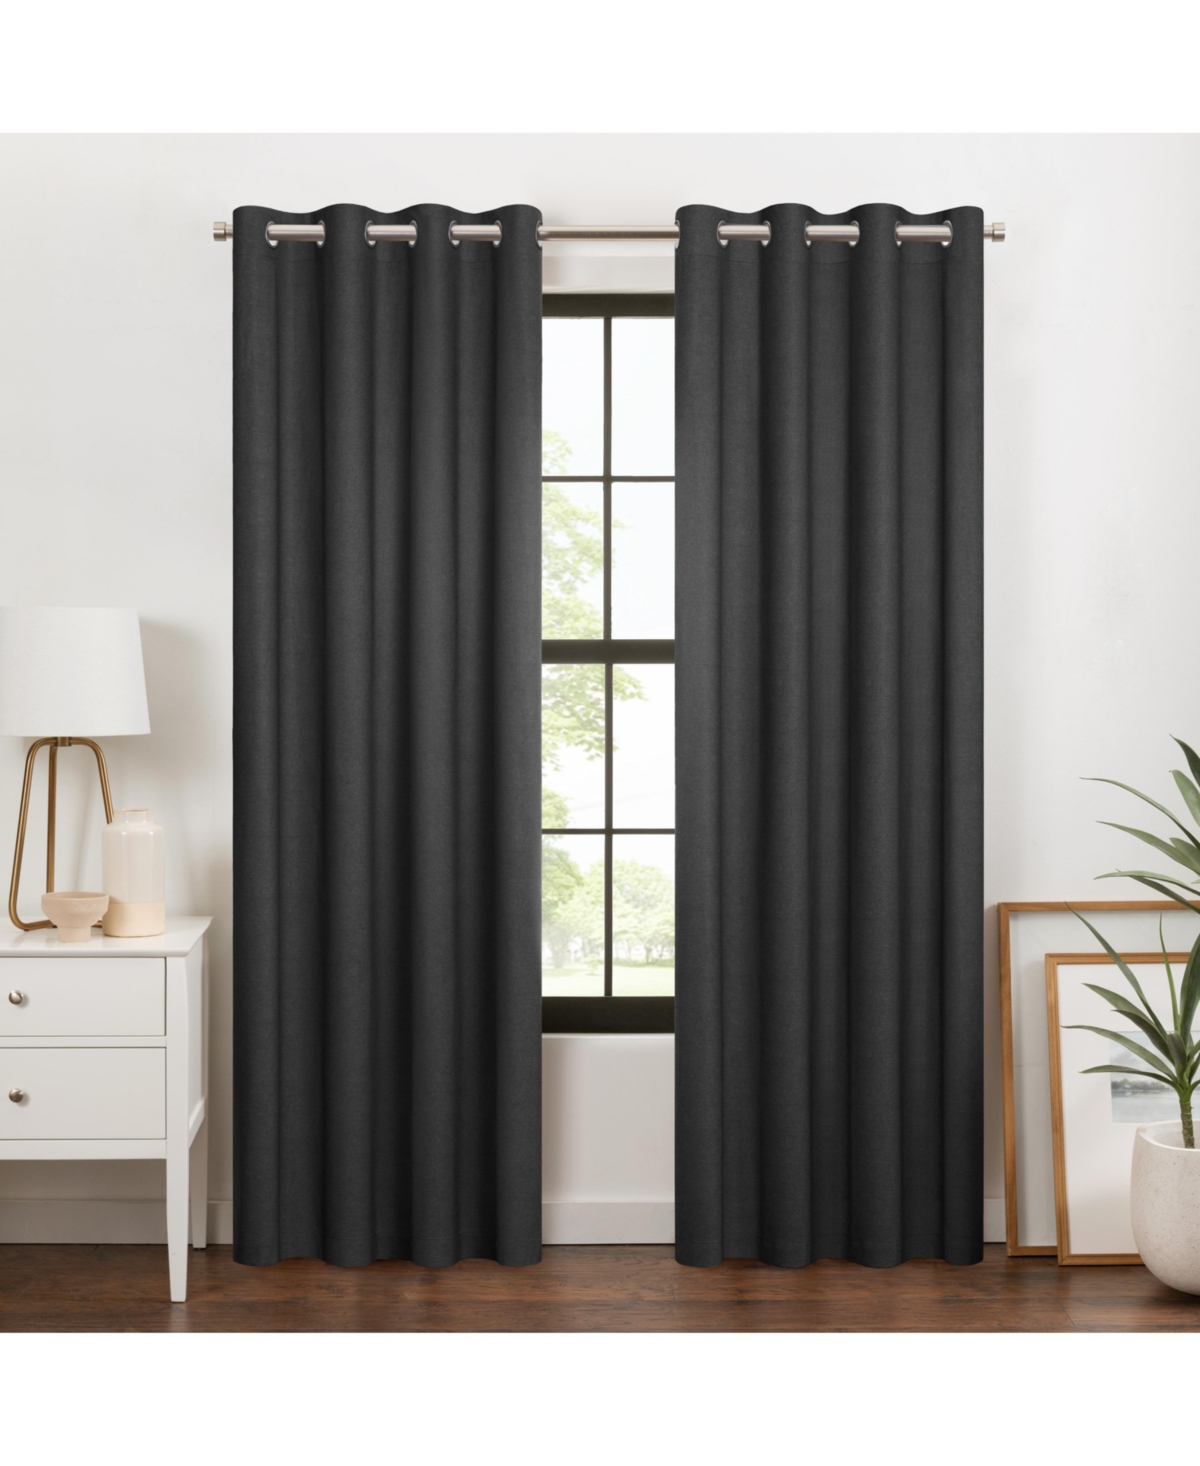 100% Blackout Curtain, Larissa Solid Grommet Curtain, 63 in Long x 50 in Wide, Textured, Onyx Black - Black